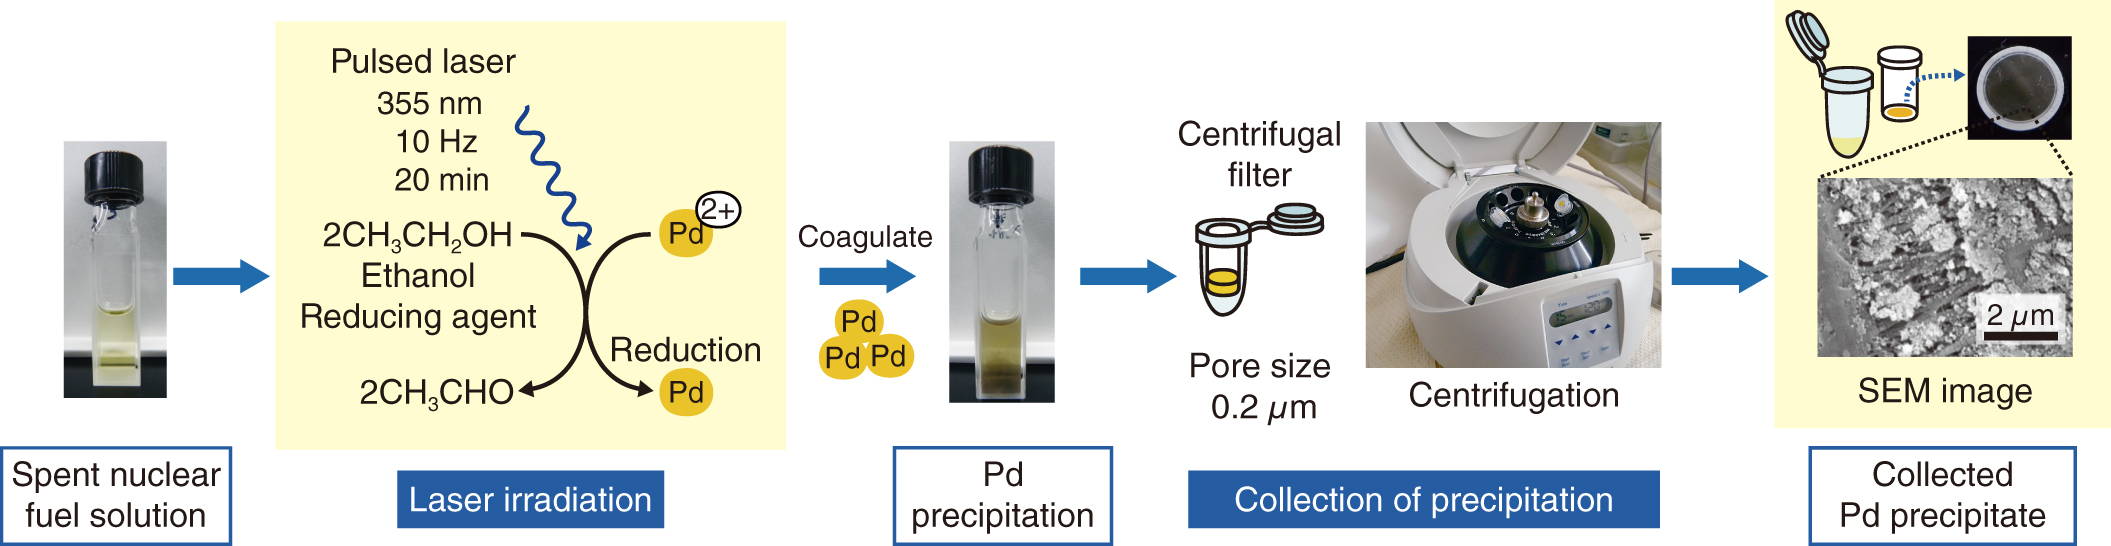 Fig.4-17  Separation mechanism of high-purity Pd by laser irradiation and its operating procedure